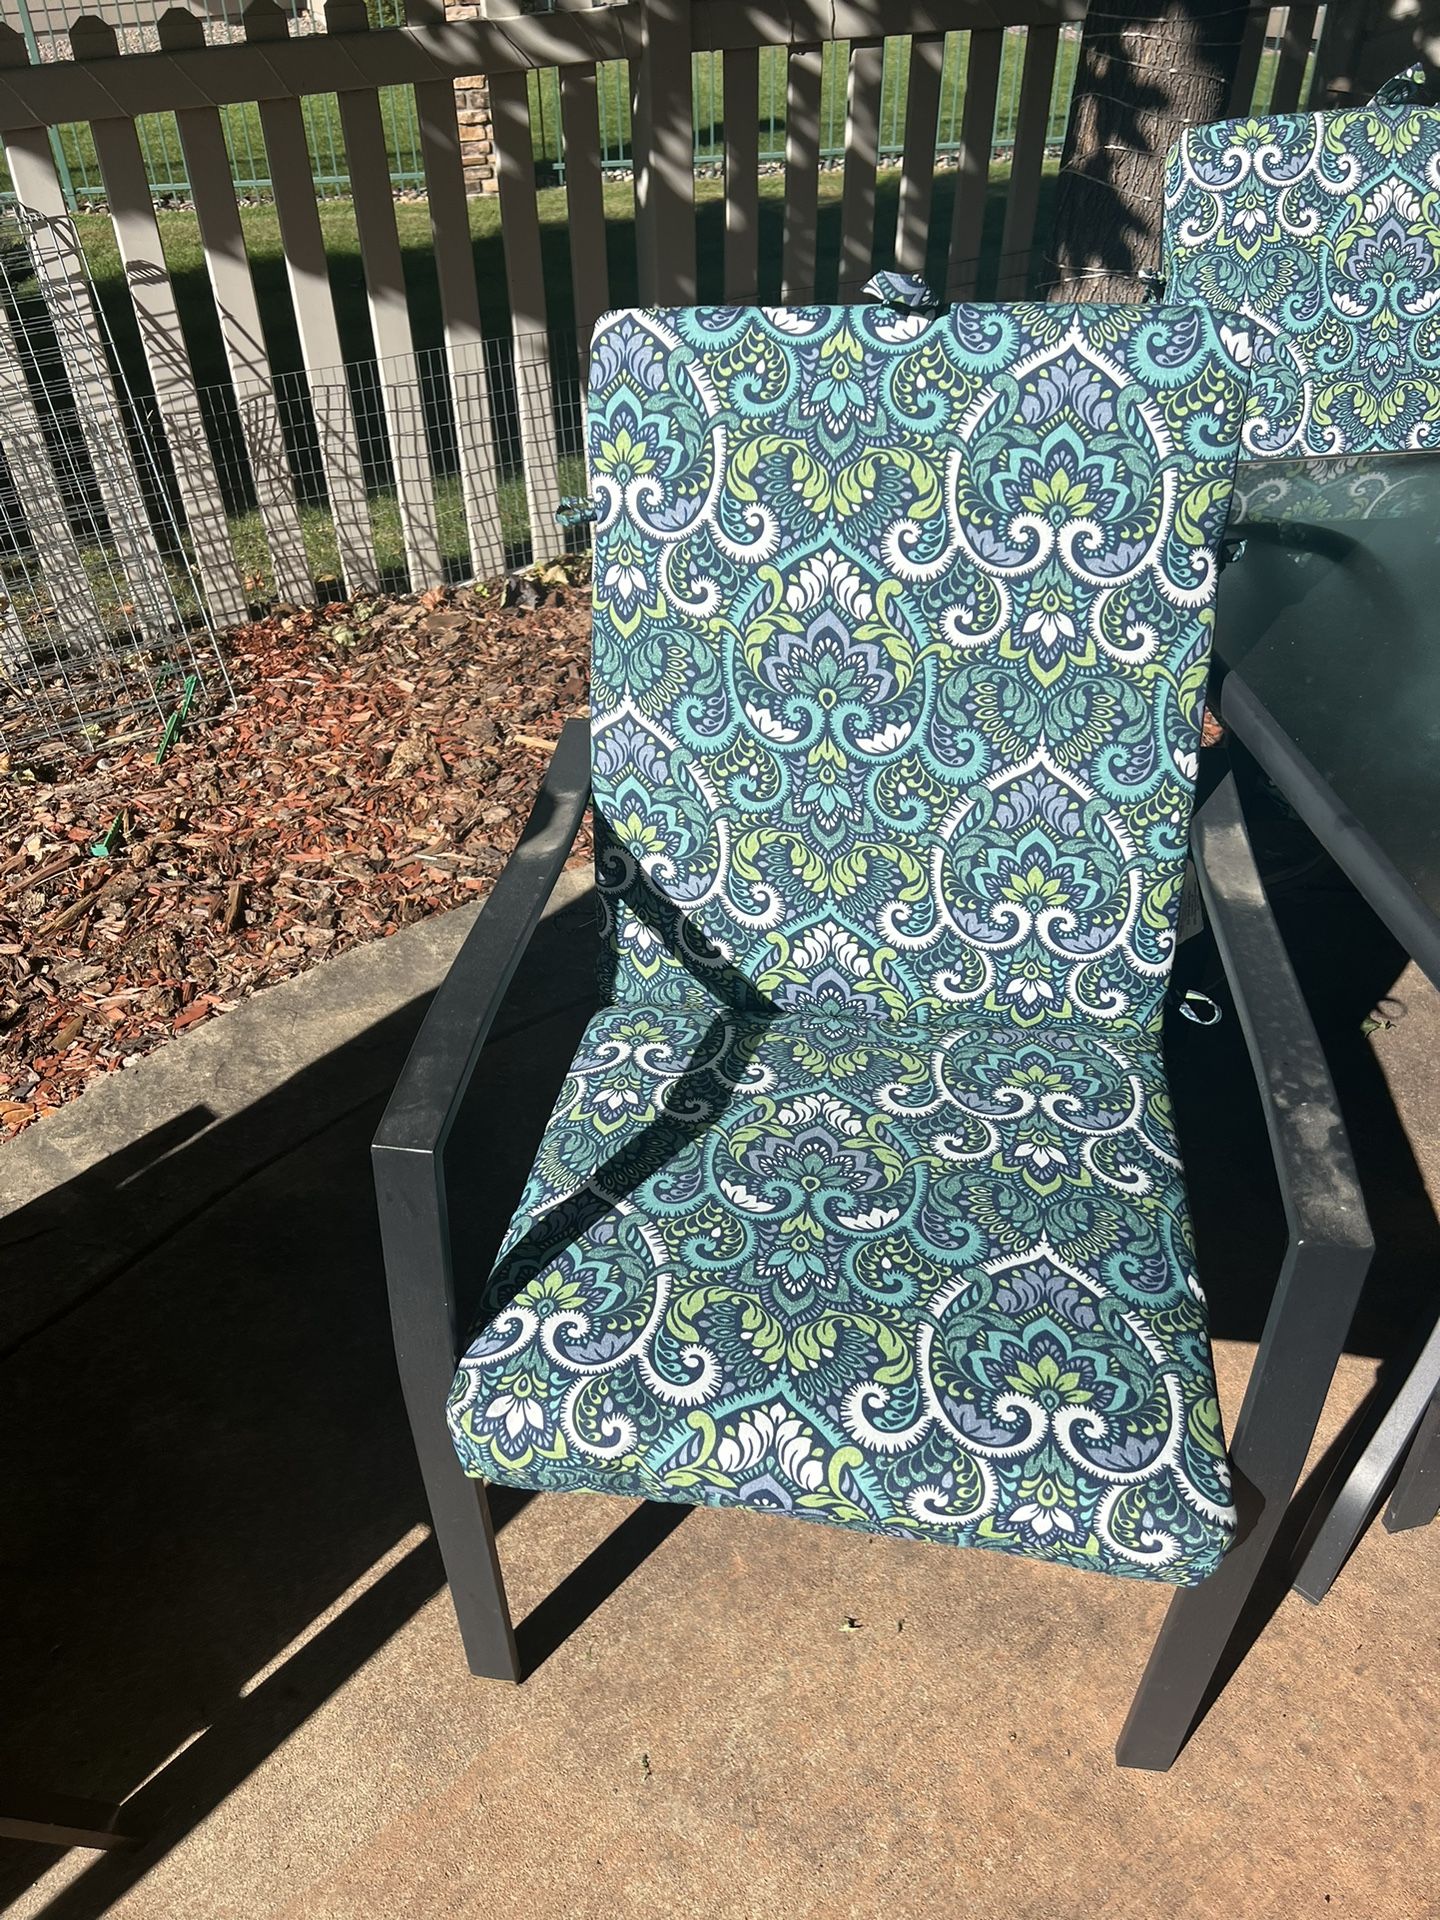 3 - Outdoor Cushions - Brand New!  